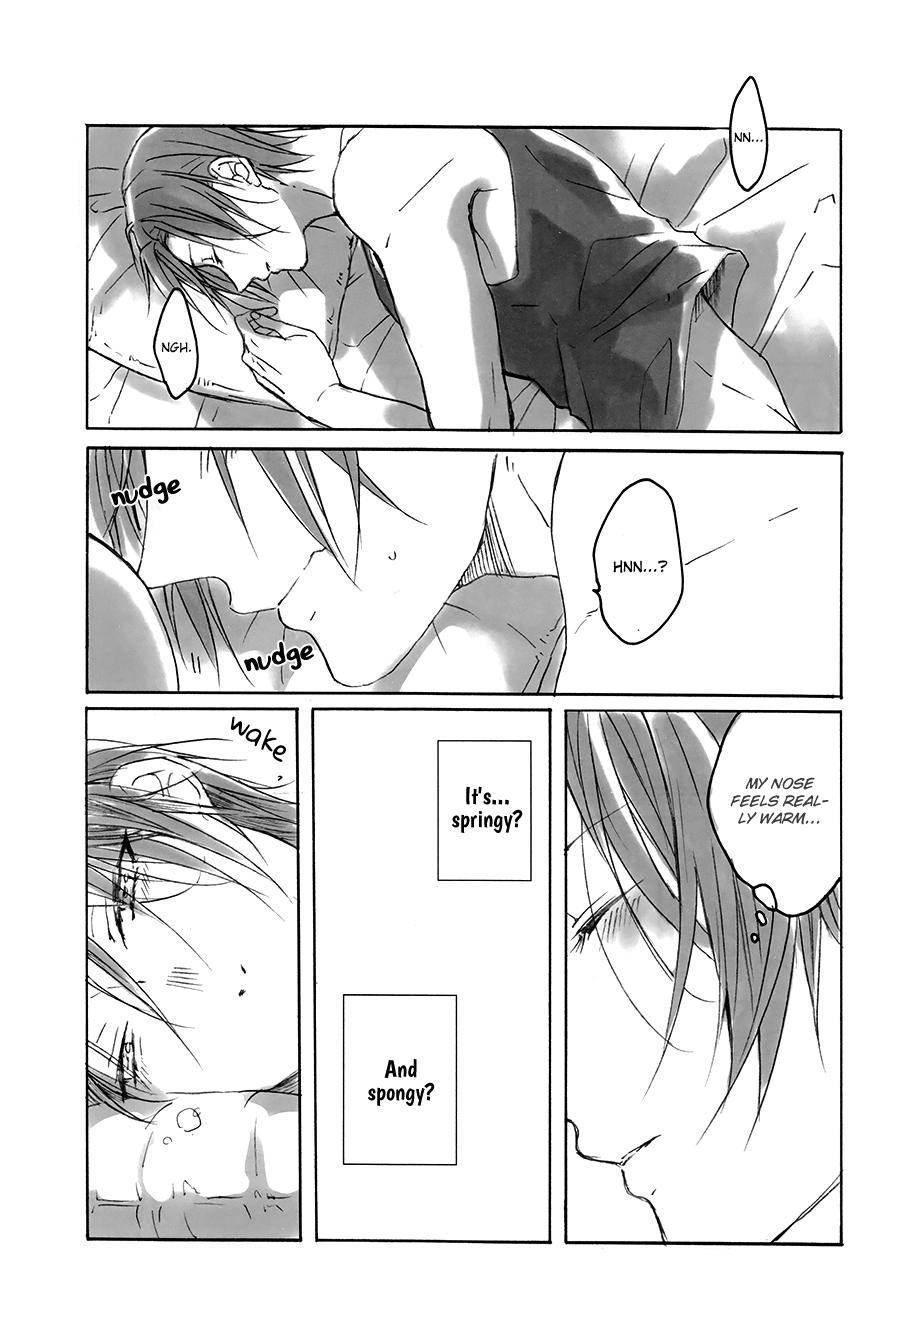 Village Can Haruka Have Sex with Rin After Suddenly Turning Into an Odd Little Lifeform? - Free Style - Page 2